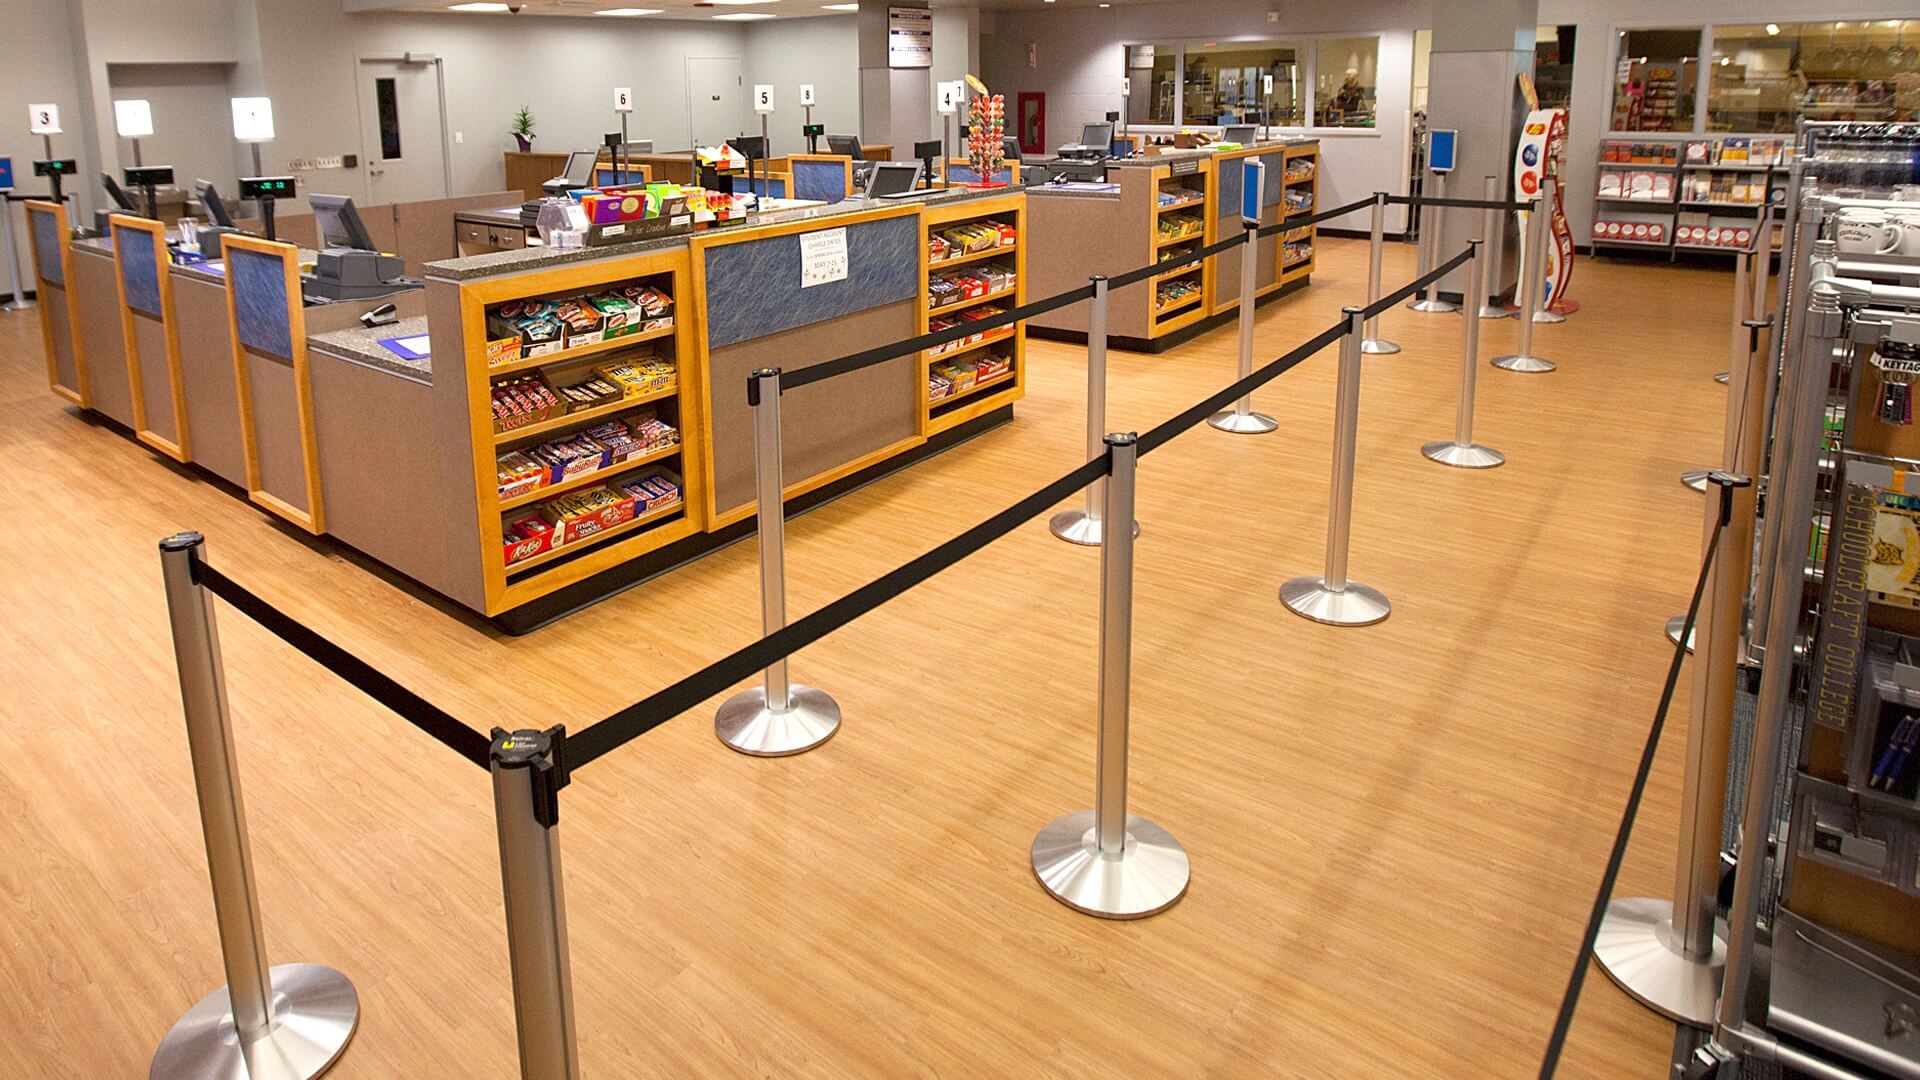 Retail,Queuing,QtracCF,StationLights,Stanchions